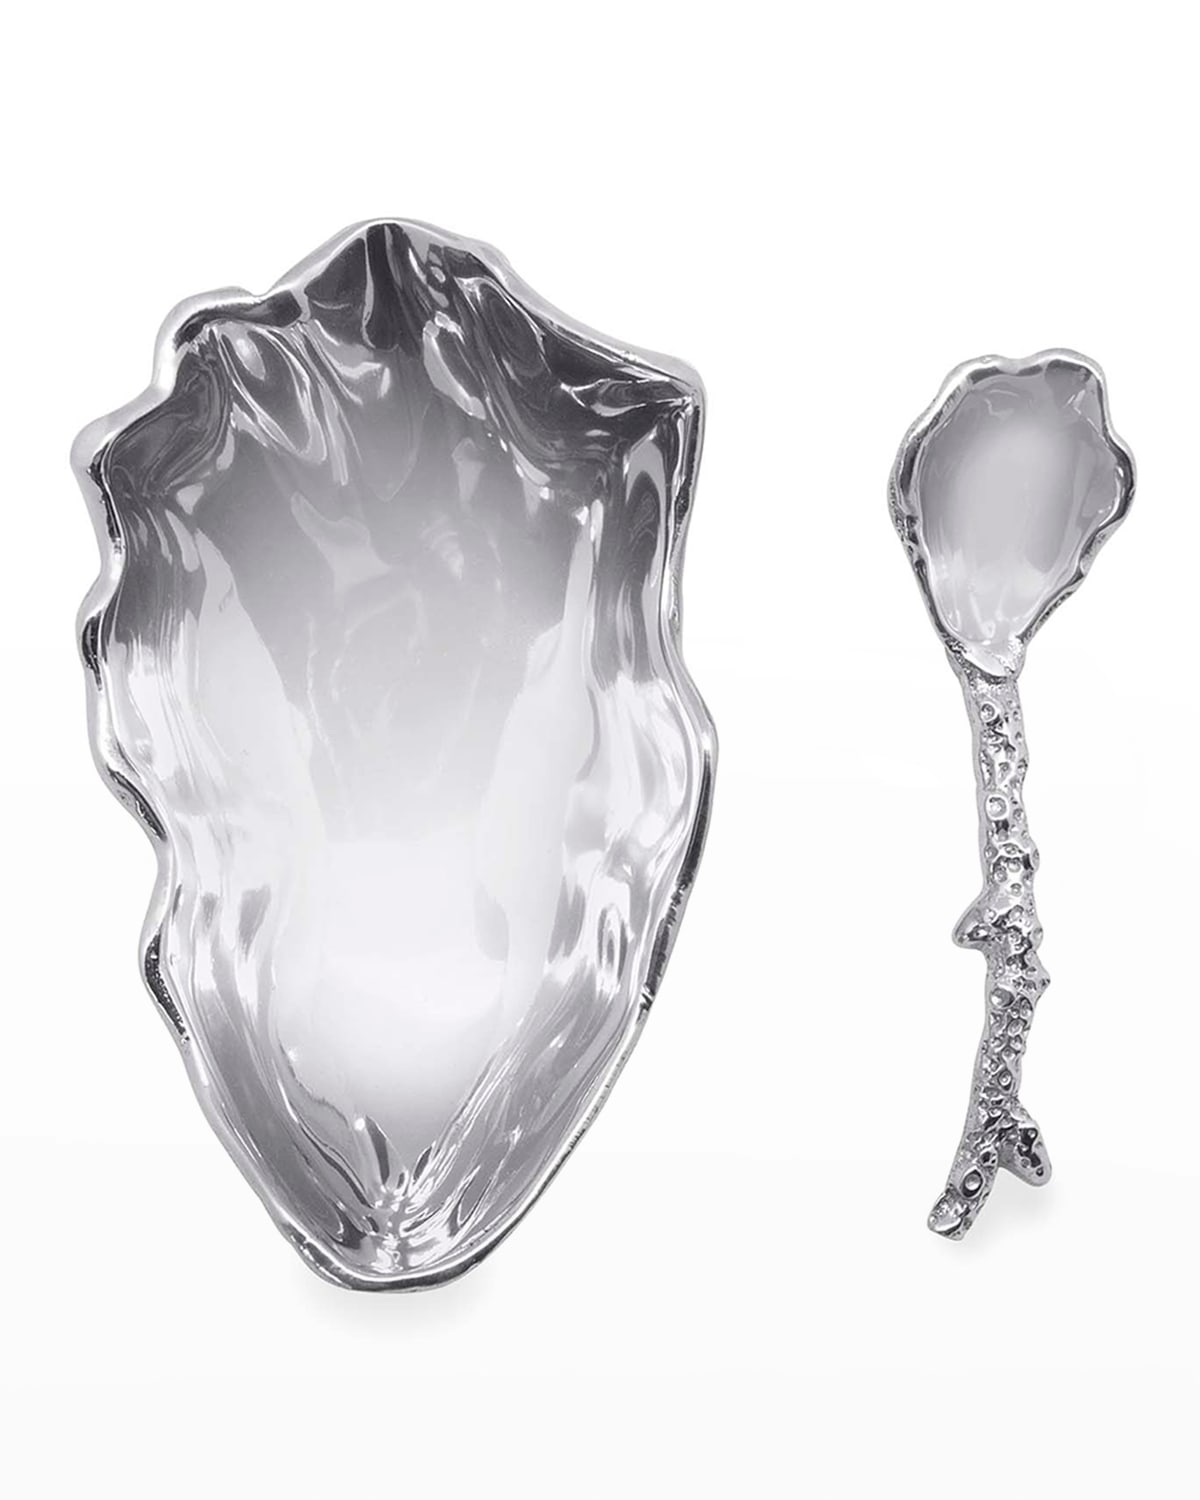 Oyster Dish and Coral Spoon Set